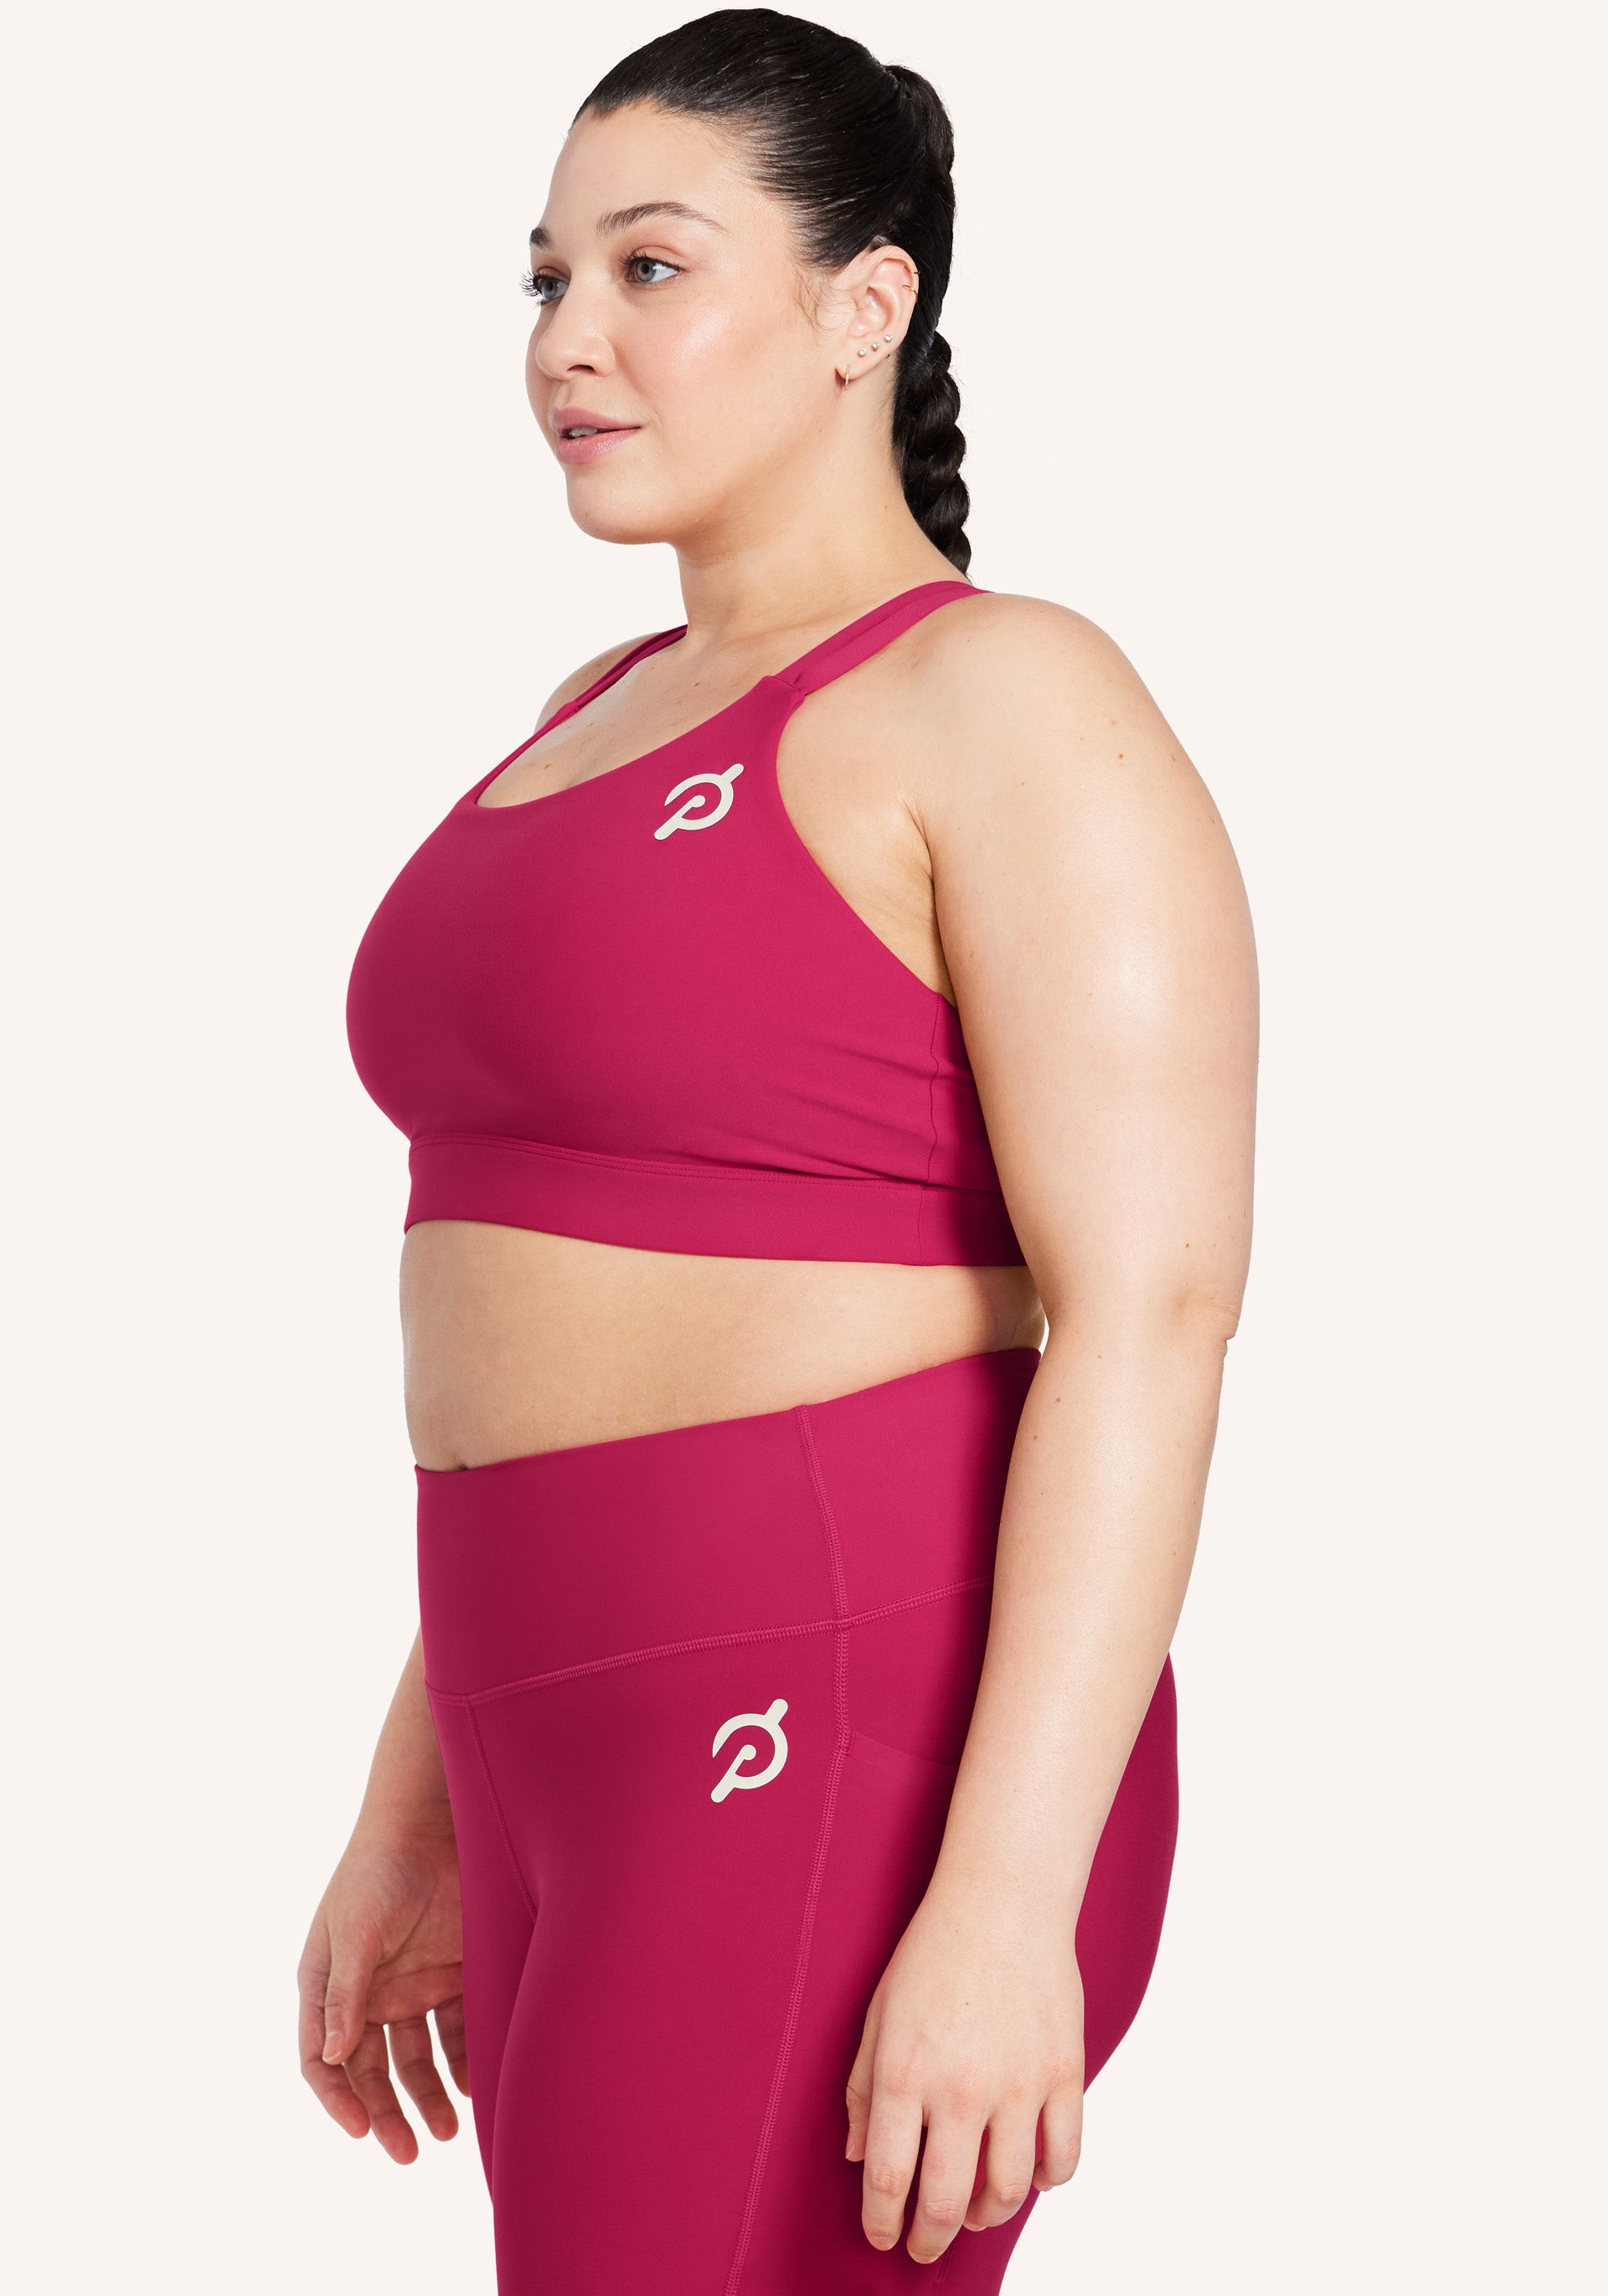 Peloton Label Cadent Strappy Bra and Cadent Legging, Peloton Launched Its  Own Apparel Label — We're Already Clicking Add to Cart on These Pieces